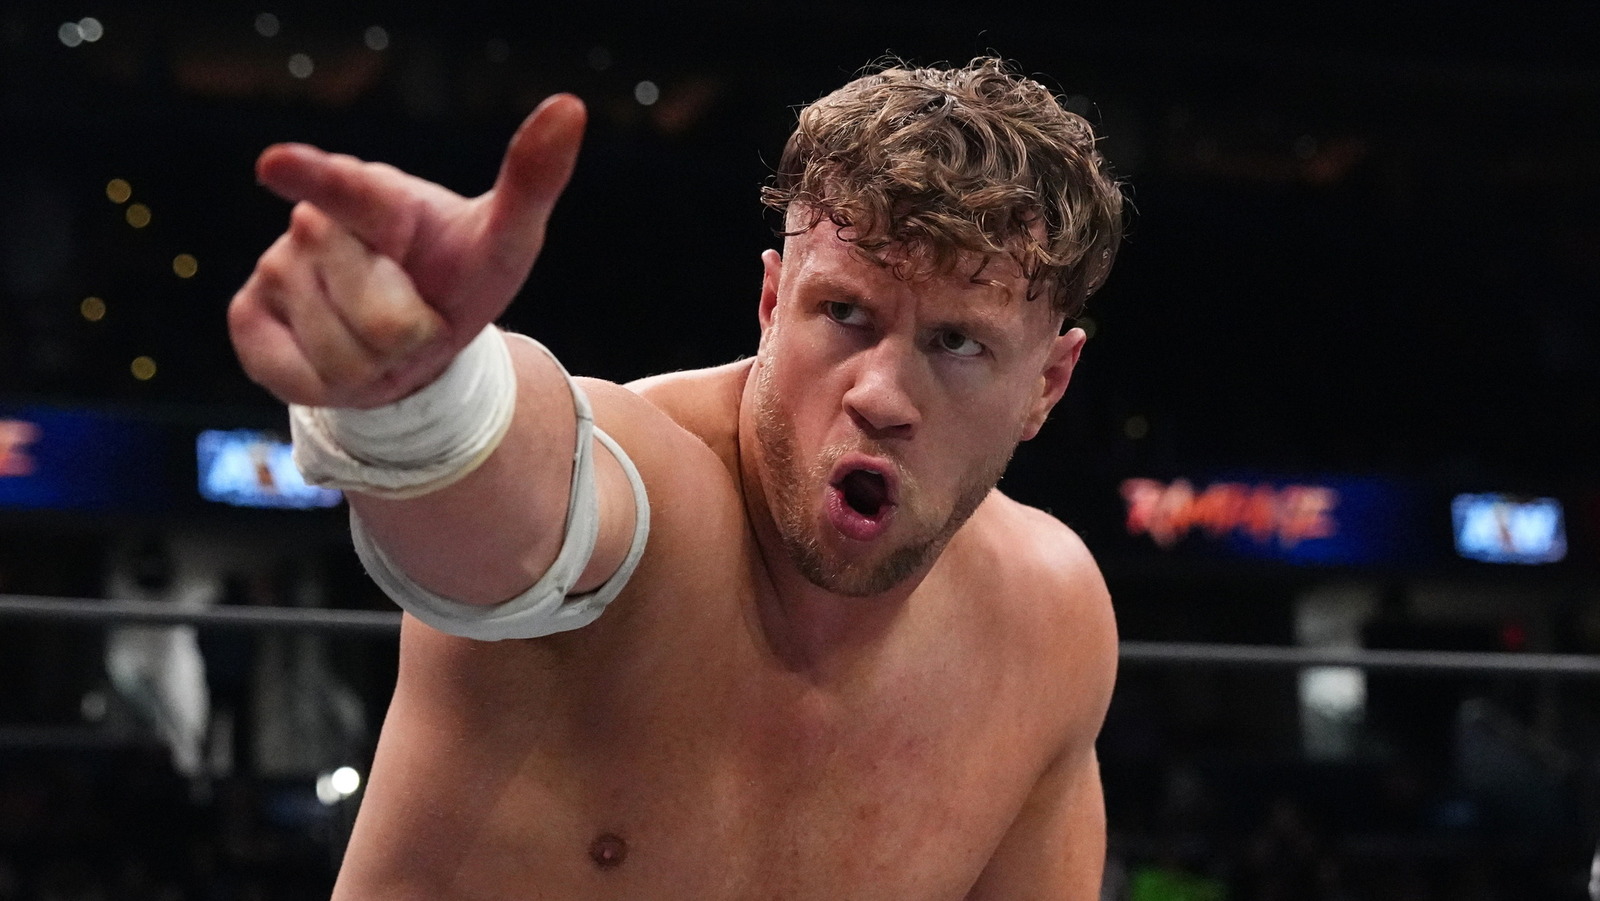 Will Ospreay On The Pressure He Faced Before Wrestle Kingdom Loss To ...